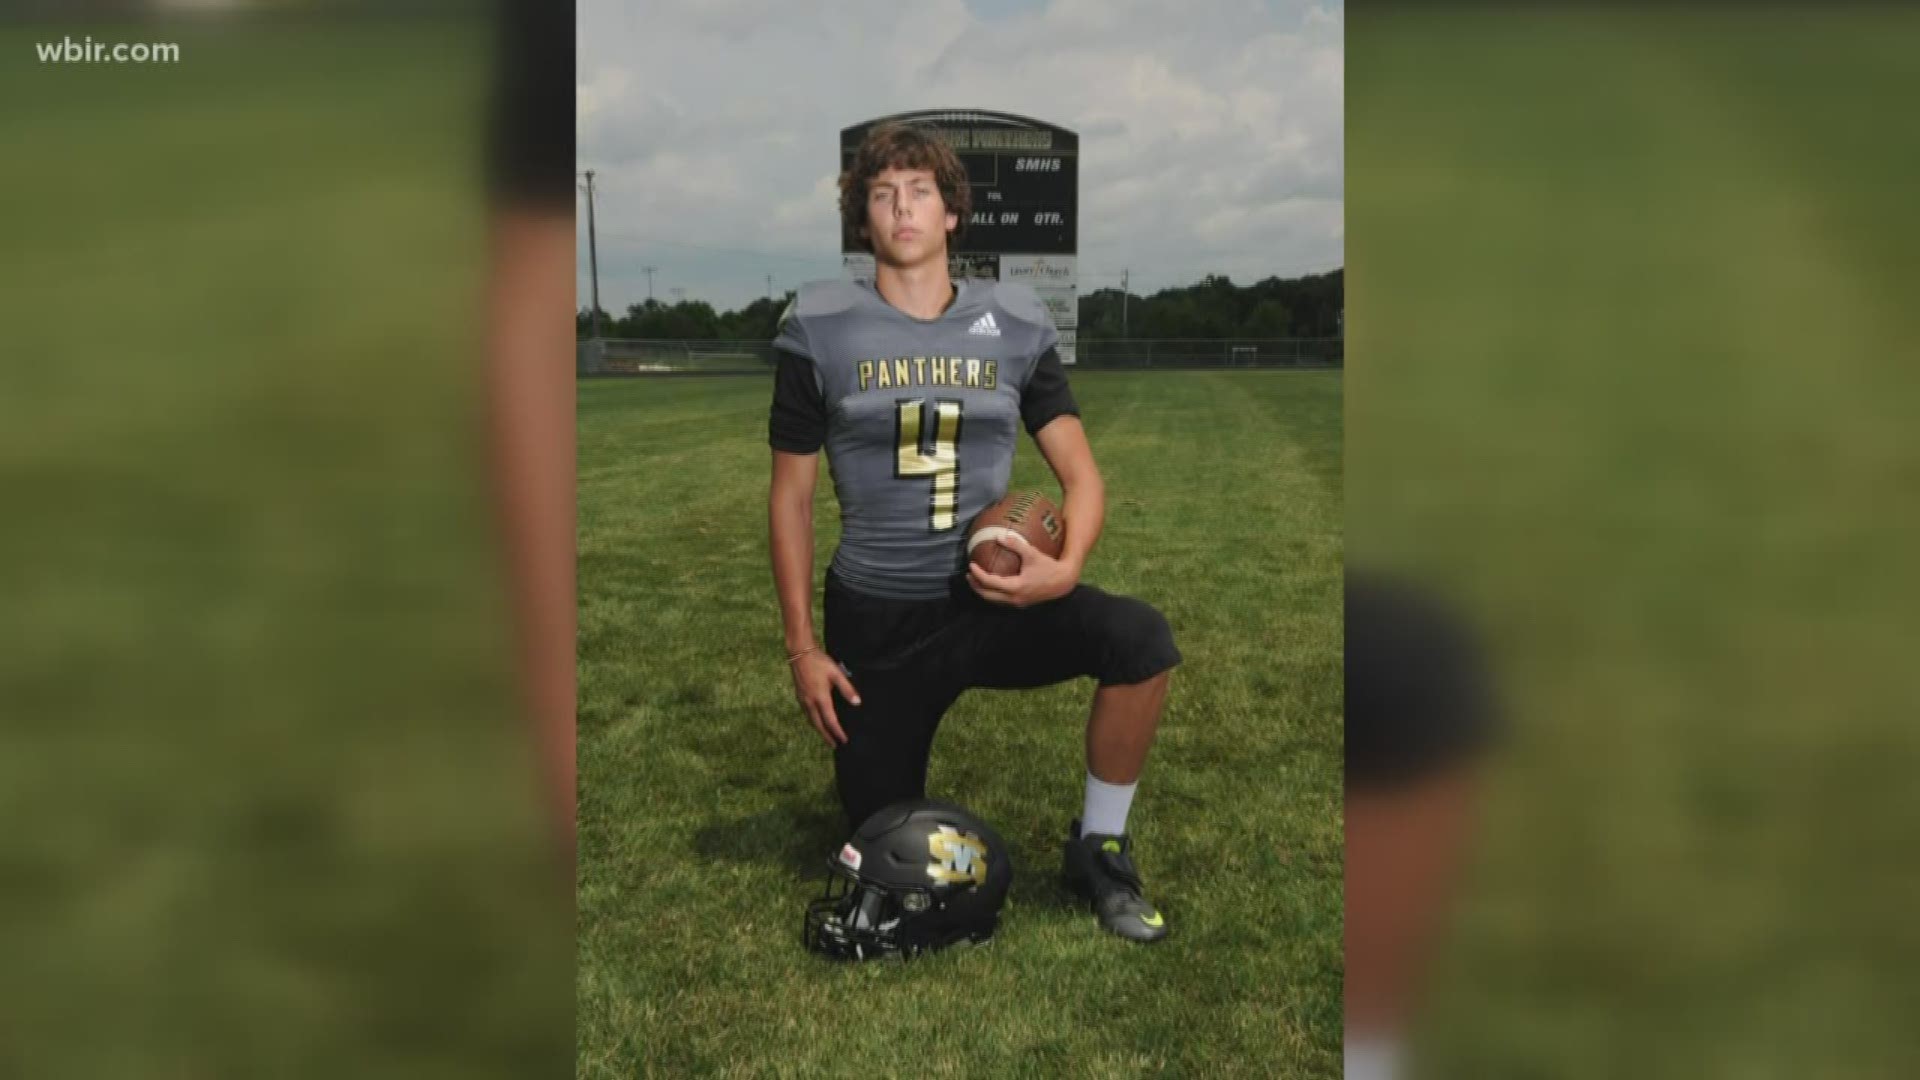 He was a junior at stone memorial high school where he played football and soccer. Grant Bullock's football coach says he was a "bounce off the walls" kind of kid.